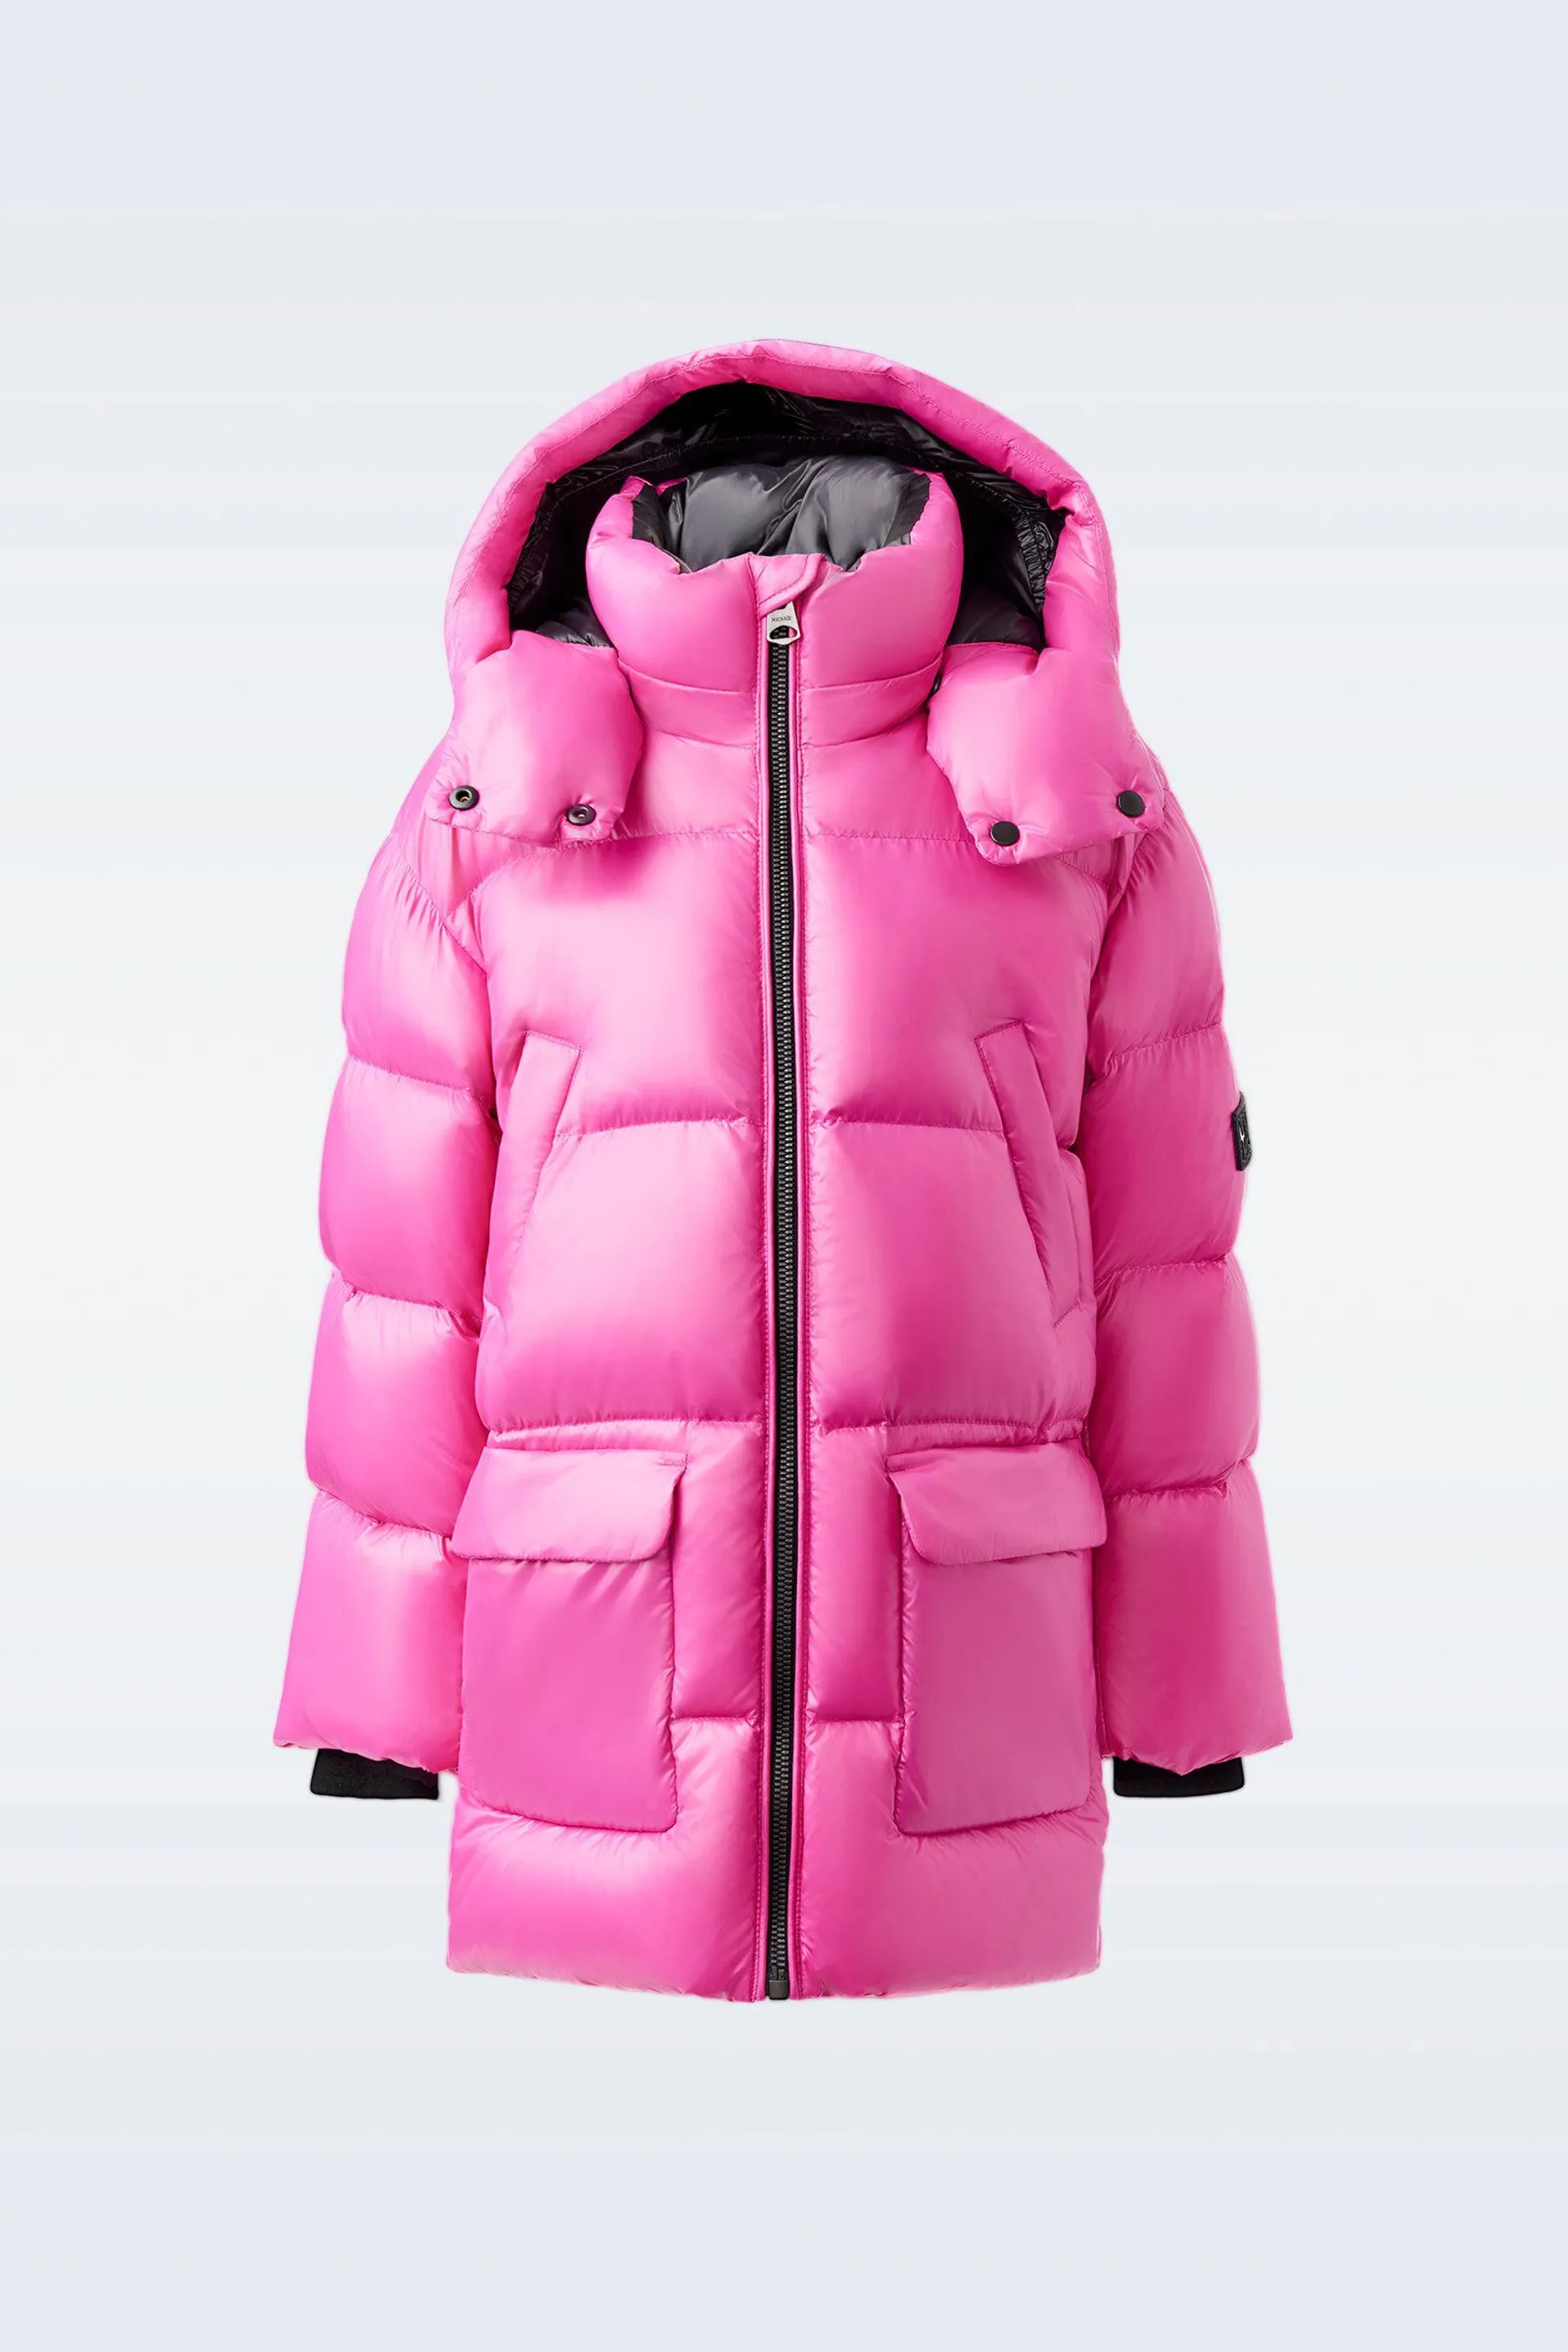 KENNIE Lustrous light down parka with hood for kids (8-14 years)